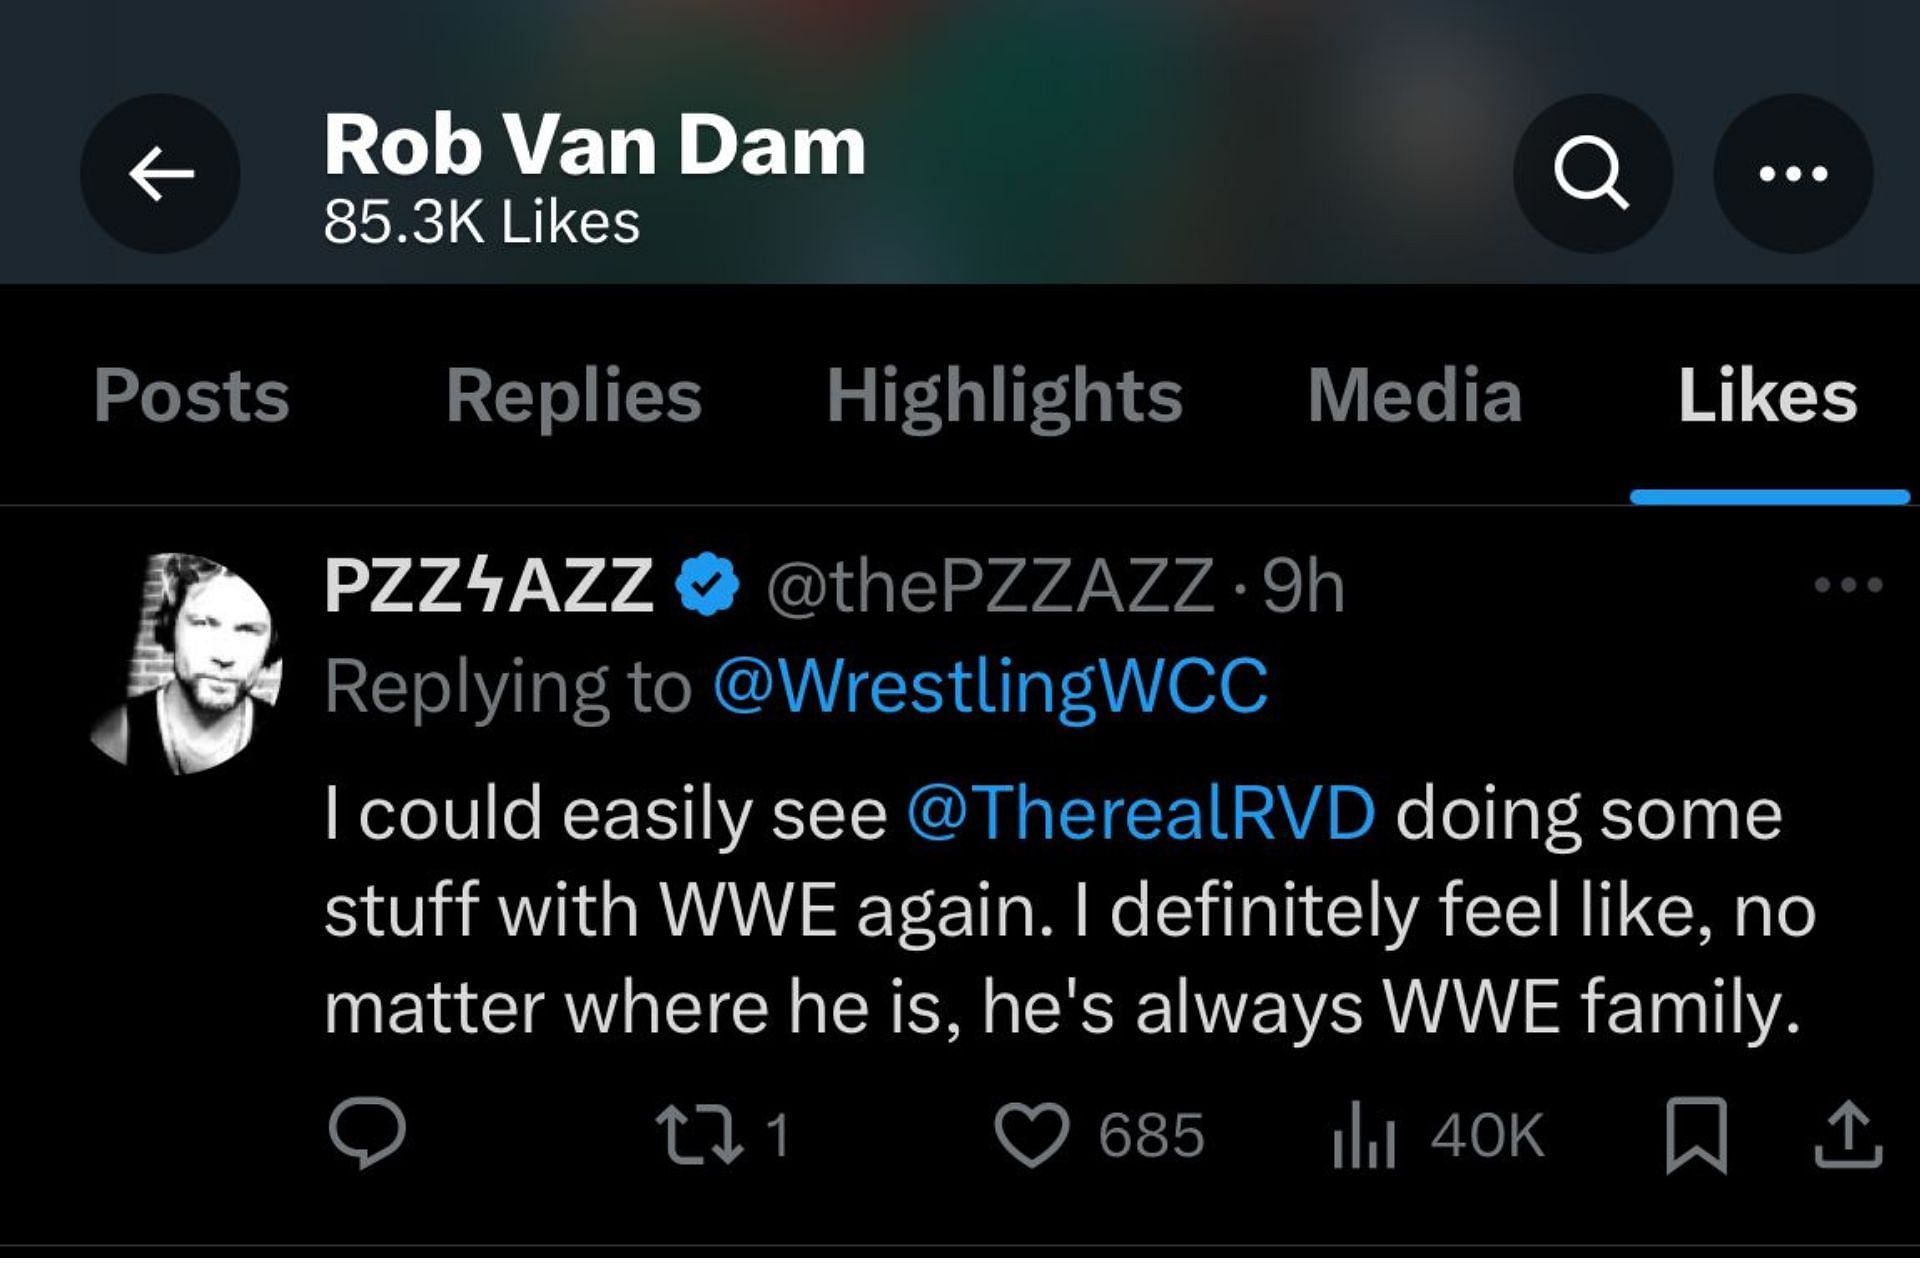 A former WWE wrestler stoked rumors of his returning to WWE with his social media activity